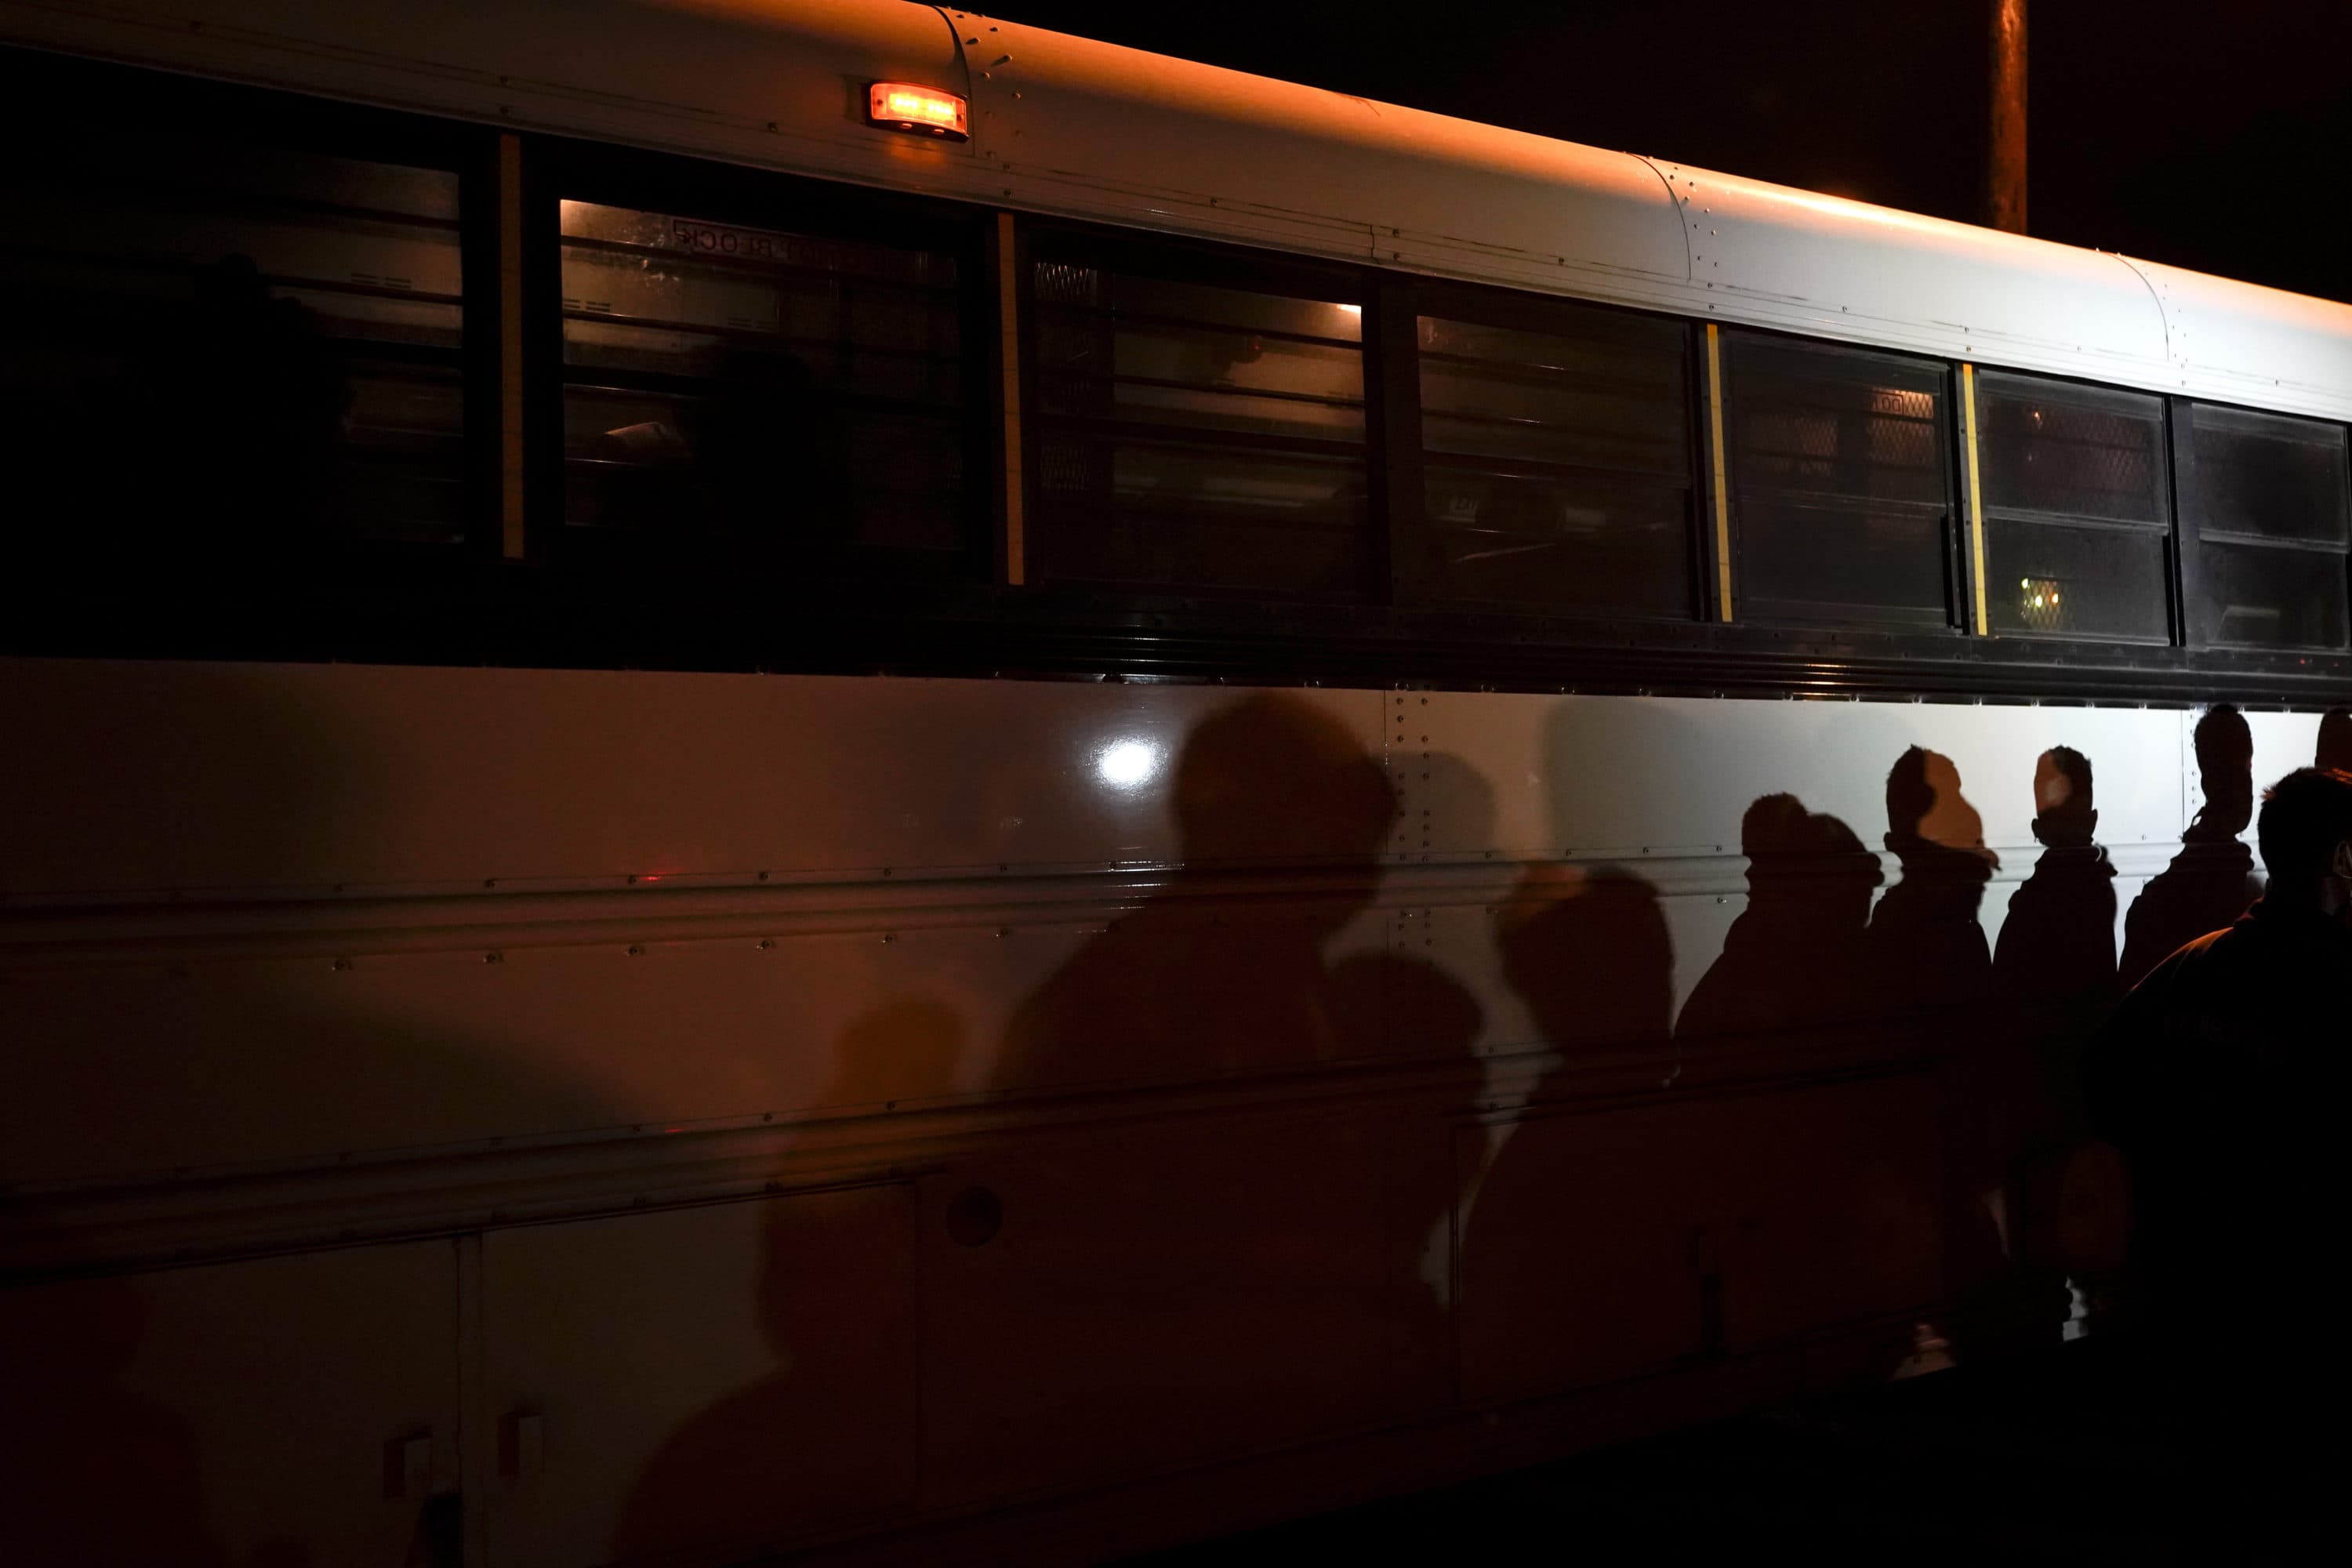 Shadows of migrants lined up at an intake area are cast along the side of a bus after turning themselves in upon crossing the U.S.-Mexico border in Roma, Texas, May 11, 2021. (Gregory Bull/AP)